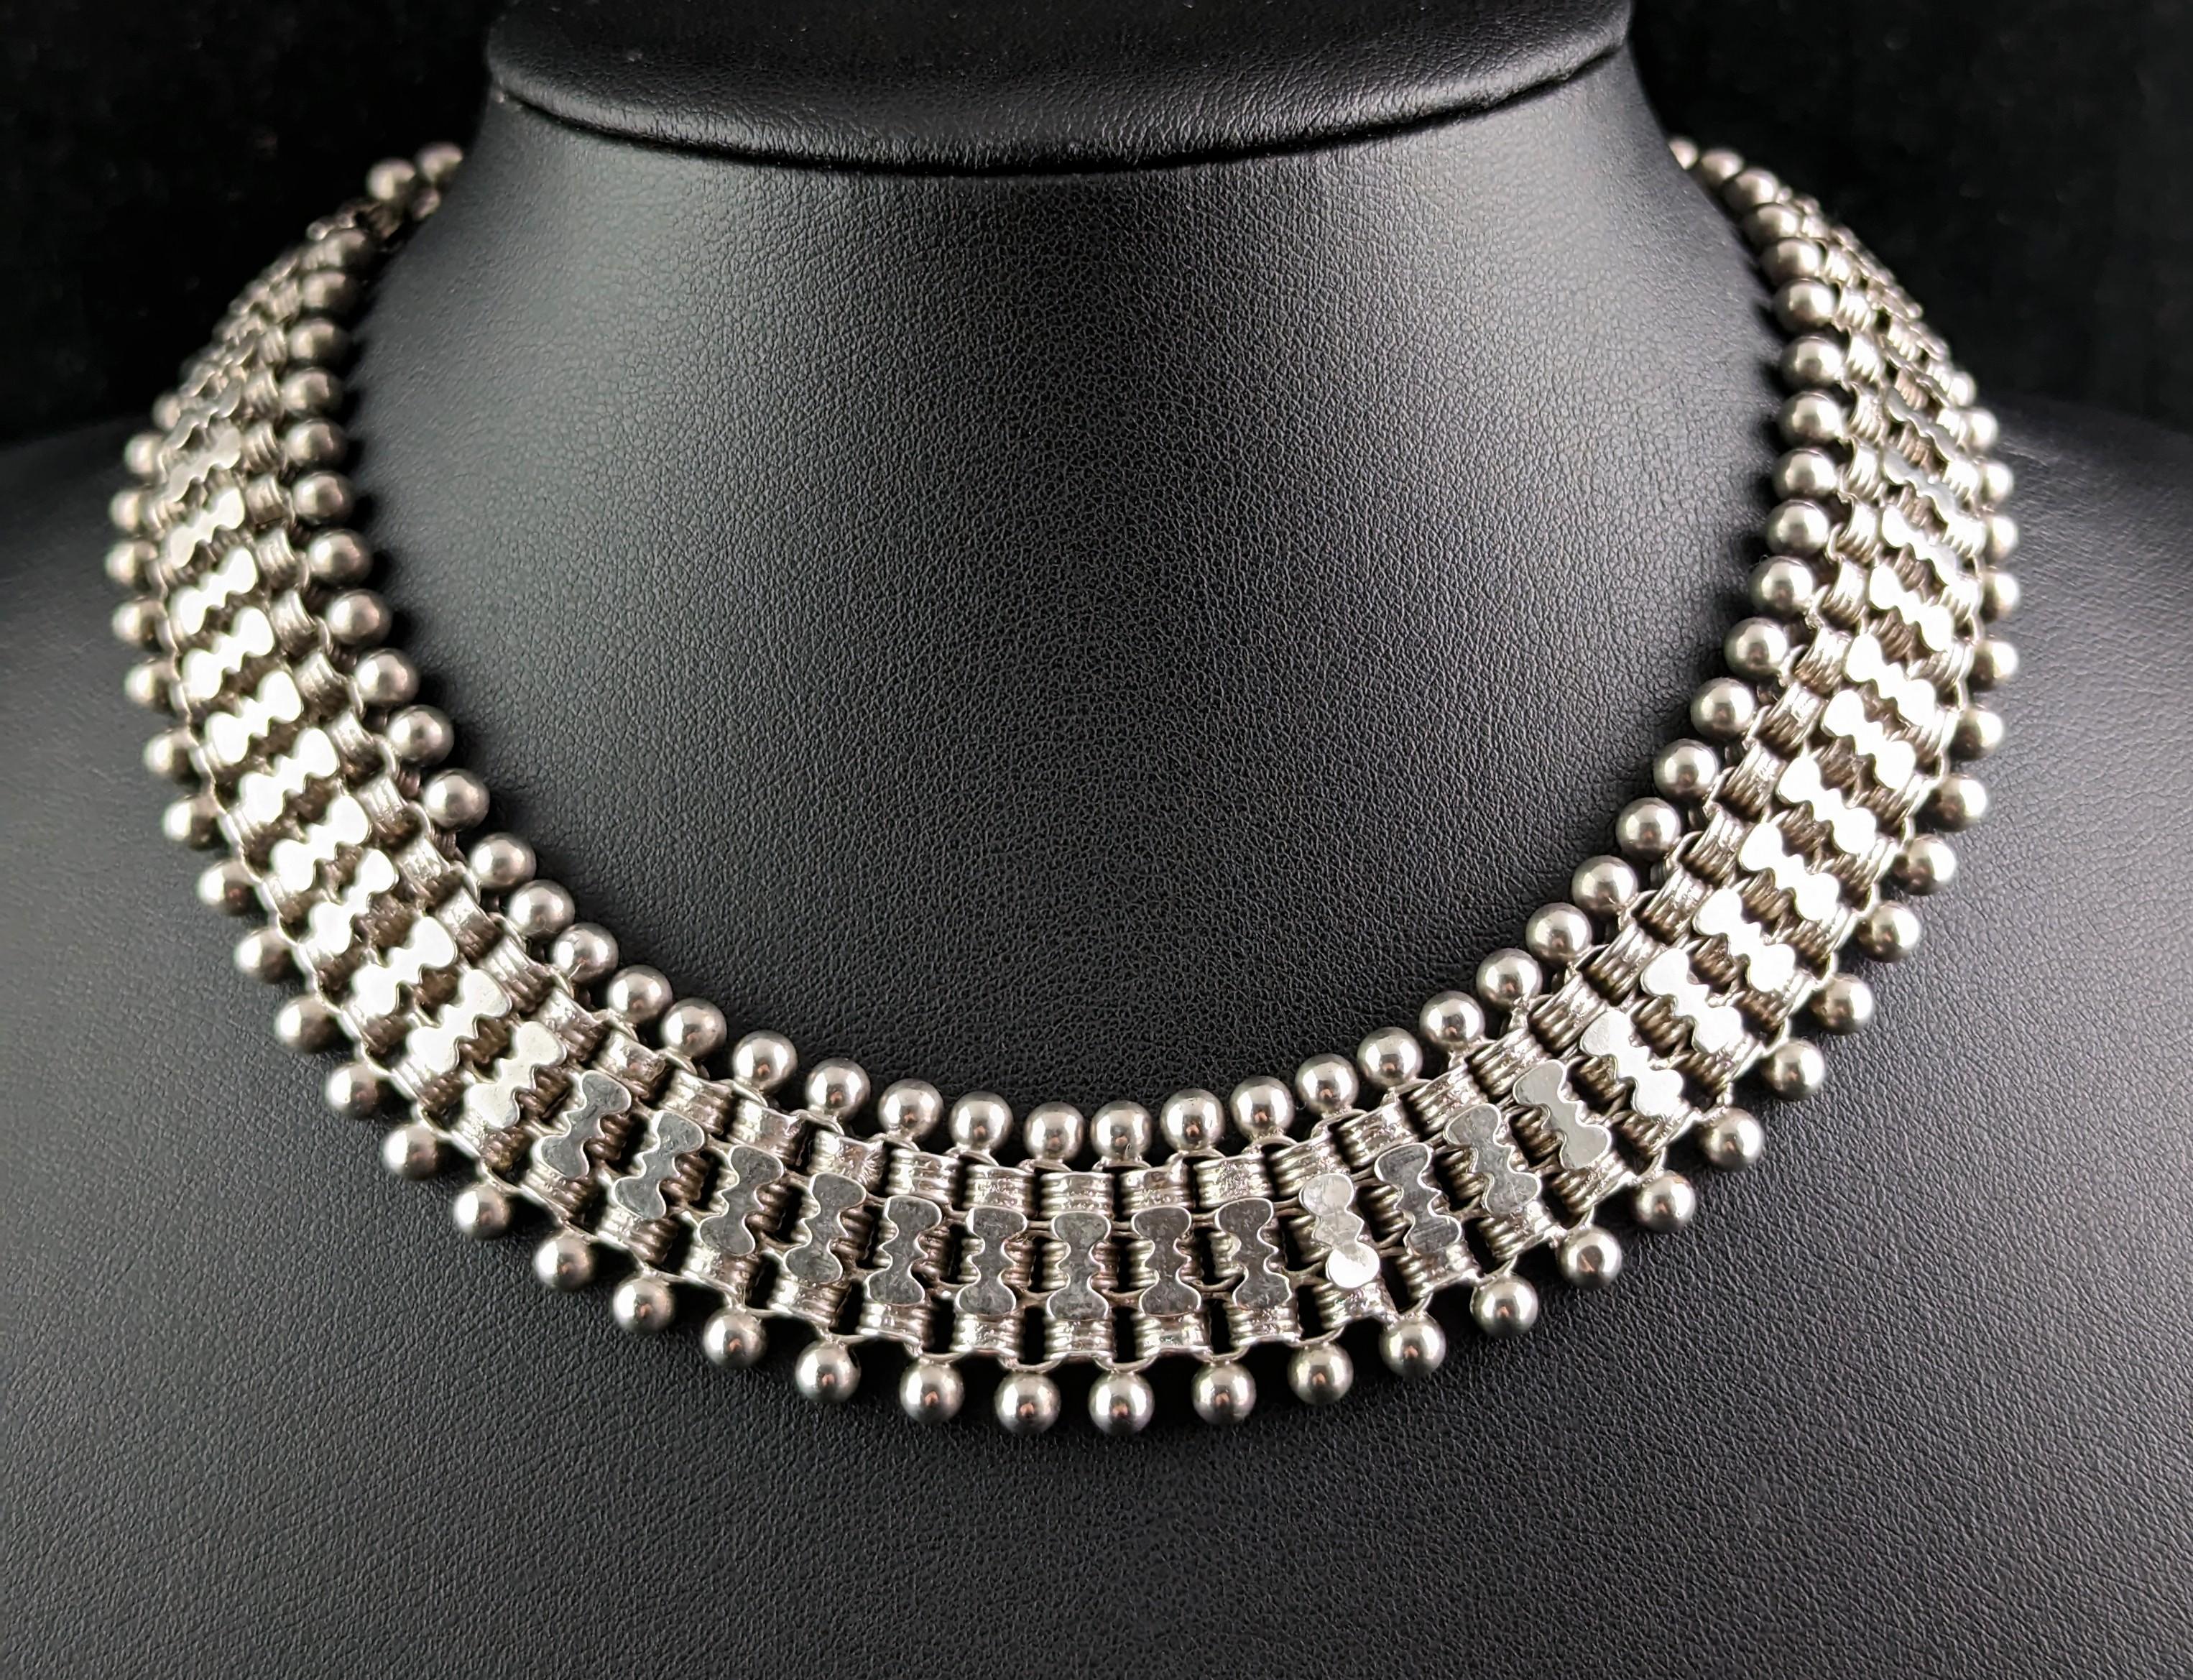 This is a most elaborate antique, Victorian era sterling silver collar necklace.

This is one of the most extravagant examples I have seen and there is so much detailing on this piece you are not sure where to look first.

It has three rows of